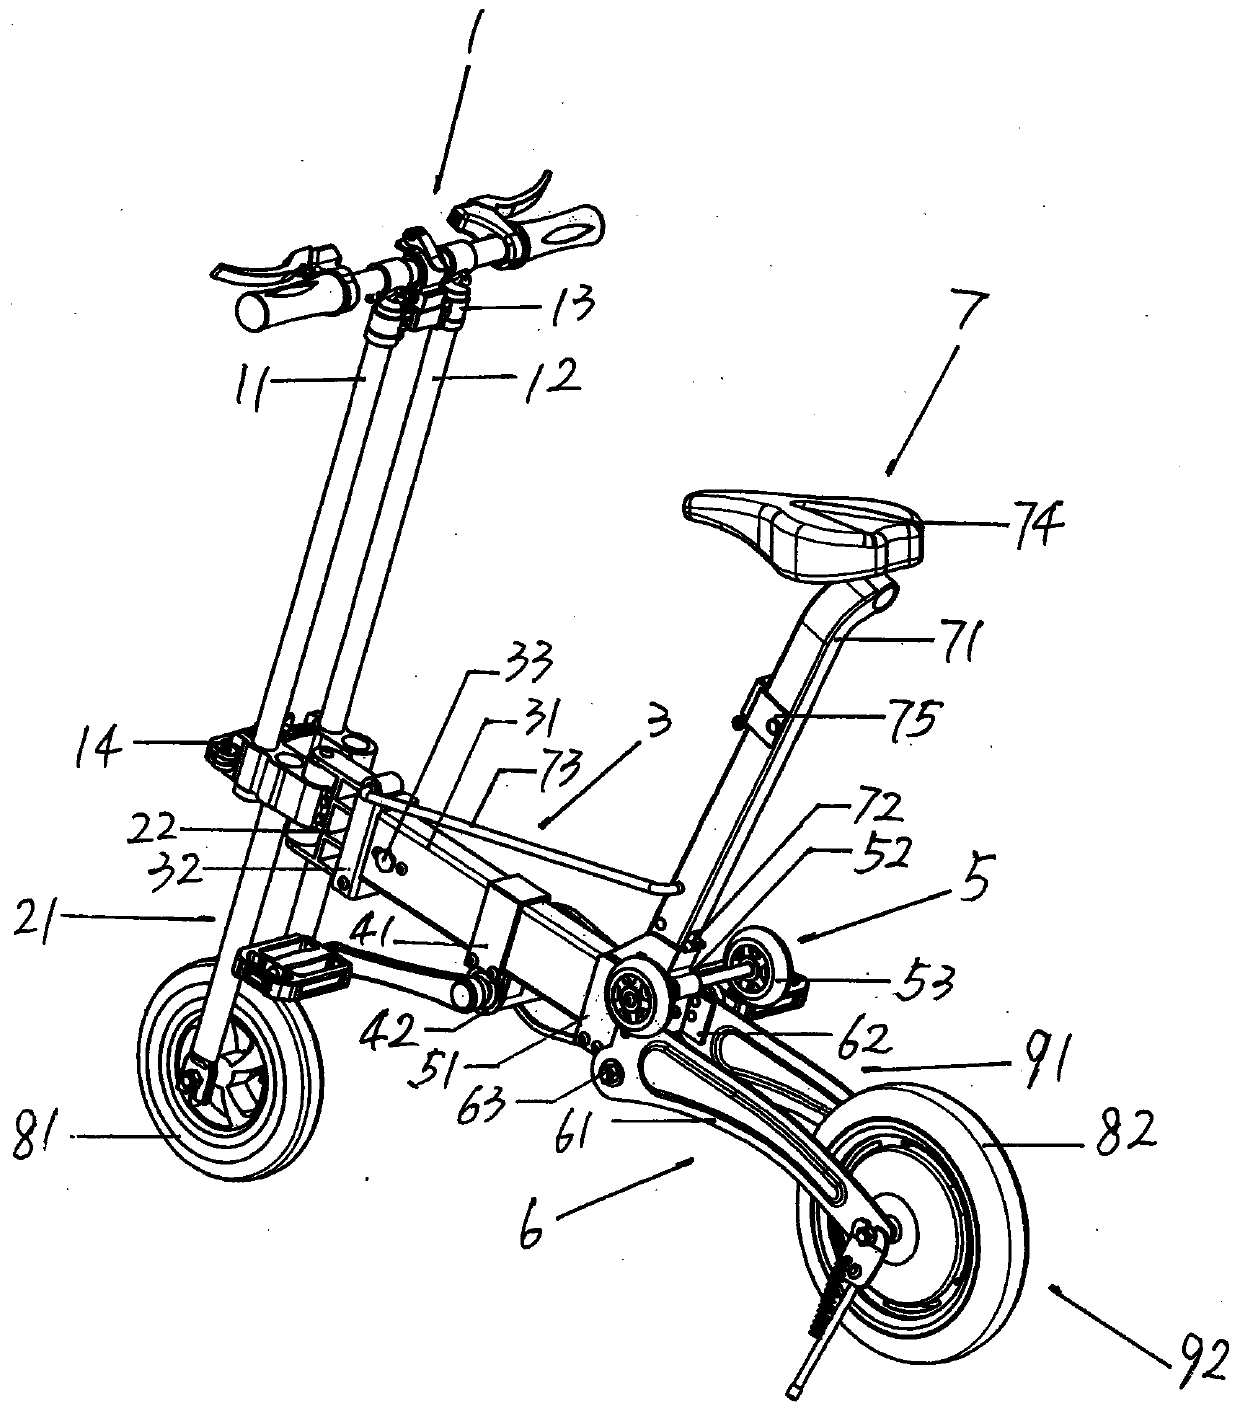 Portable folding electric moped